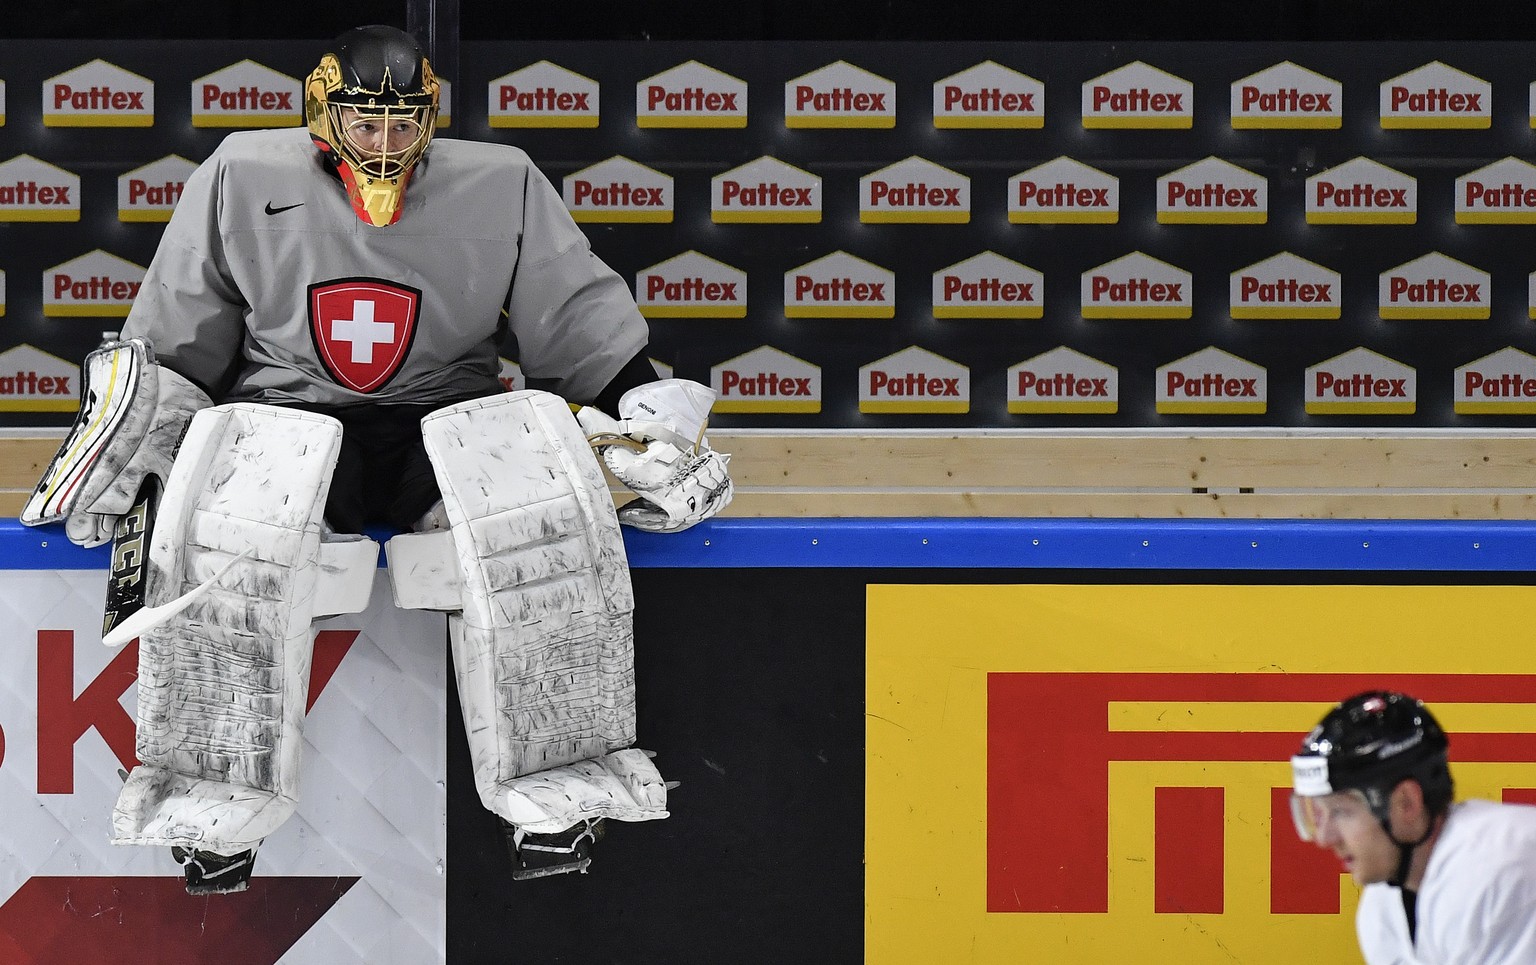 Switzerland’s goaltender Leonardo Genoni seats on a band during a training session during the Ice Hockey World Championship in Paris, France on Wednesday, May 17, 2017. (KEYSTONE/Peter Schneider)